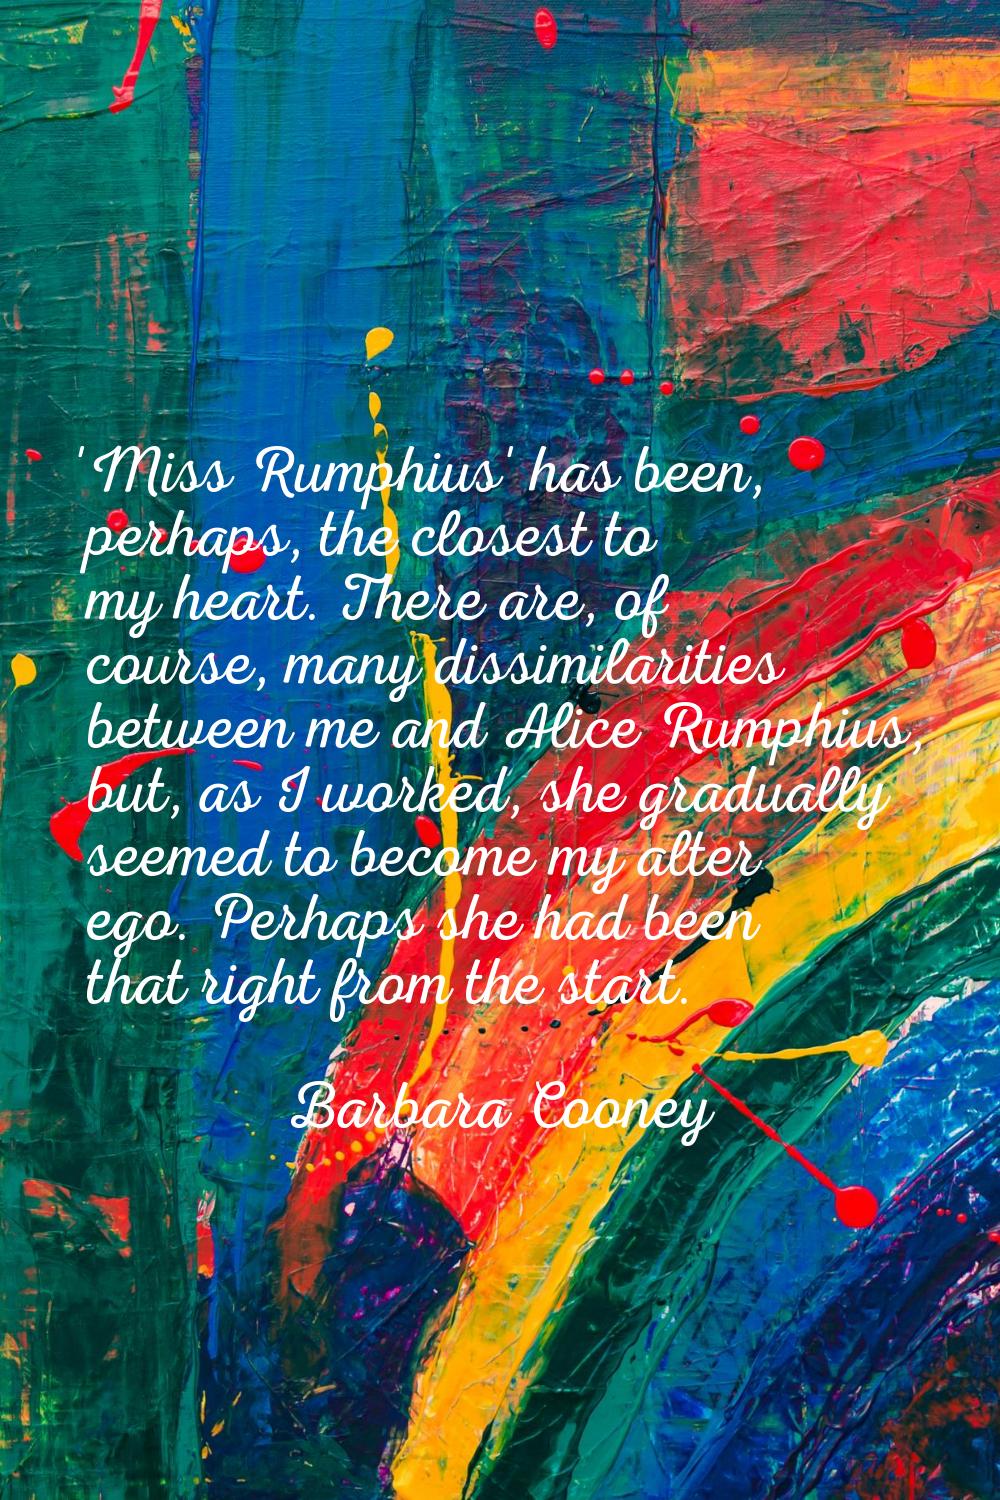 'Miss Rumphius' has been, perhaps, the closest to my heart. There are, of course, many dissimilarit